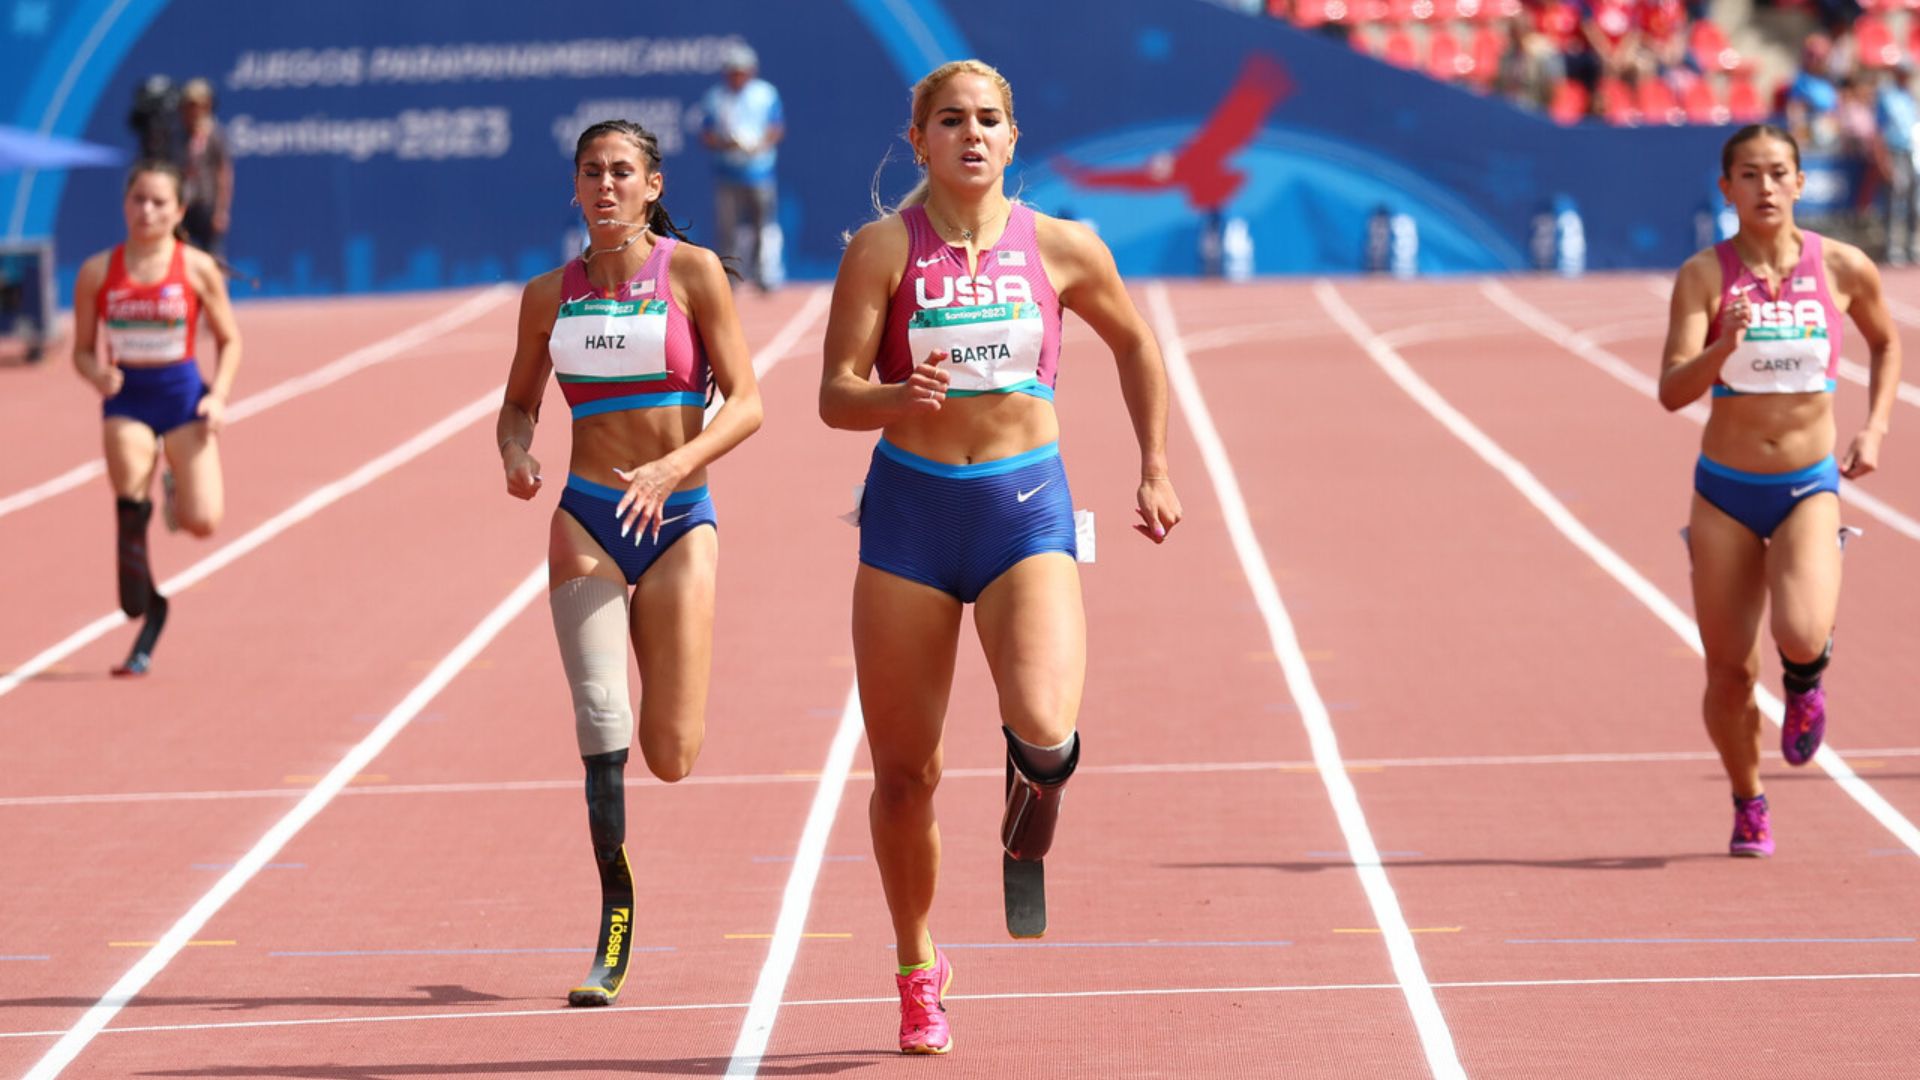 Para Athletics: The United States Sets Parapan American Record in 200m T35